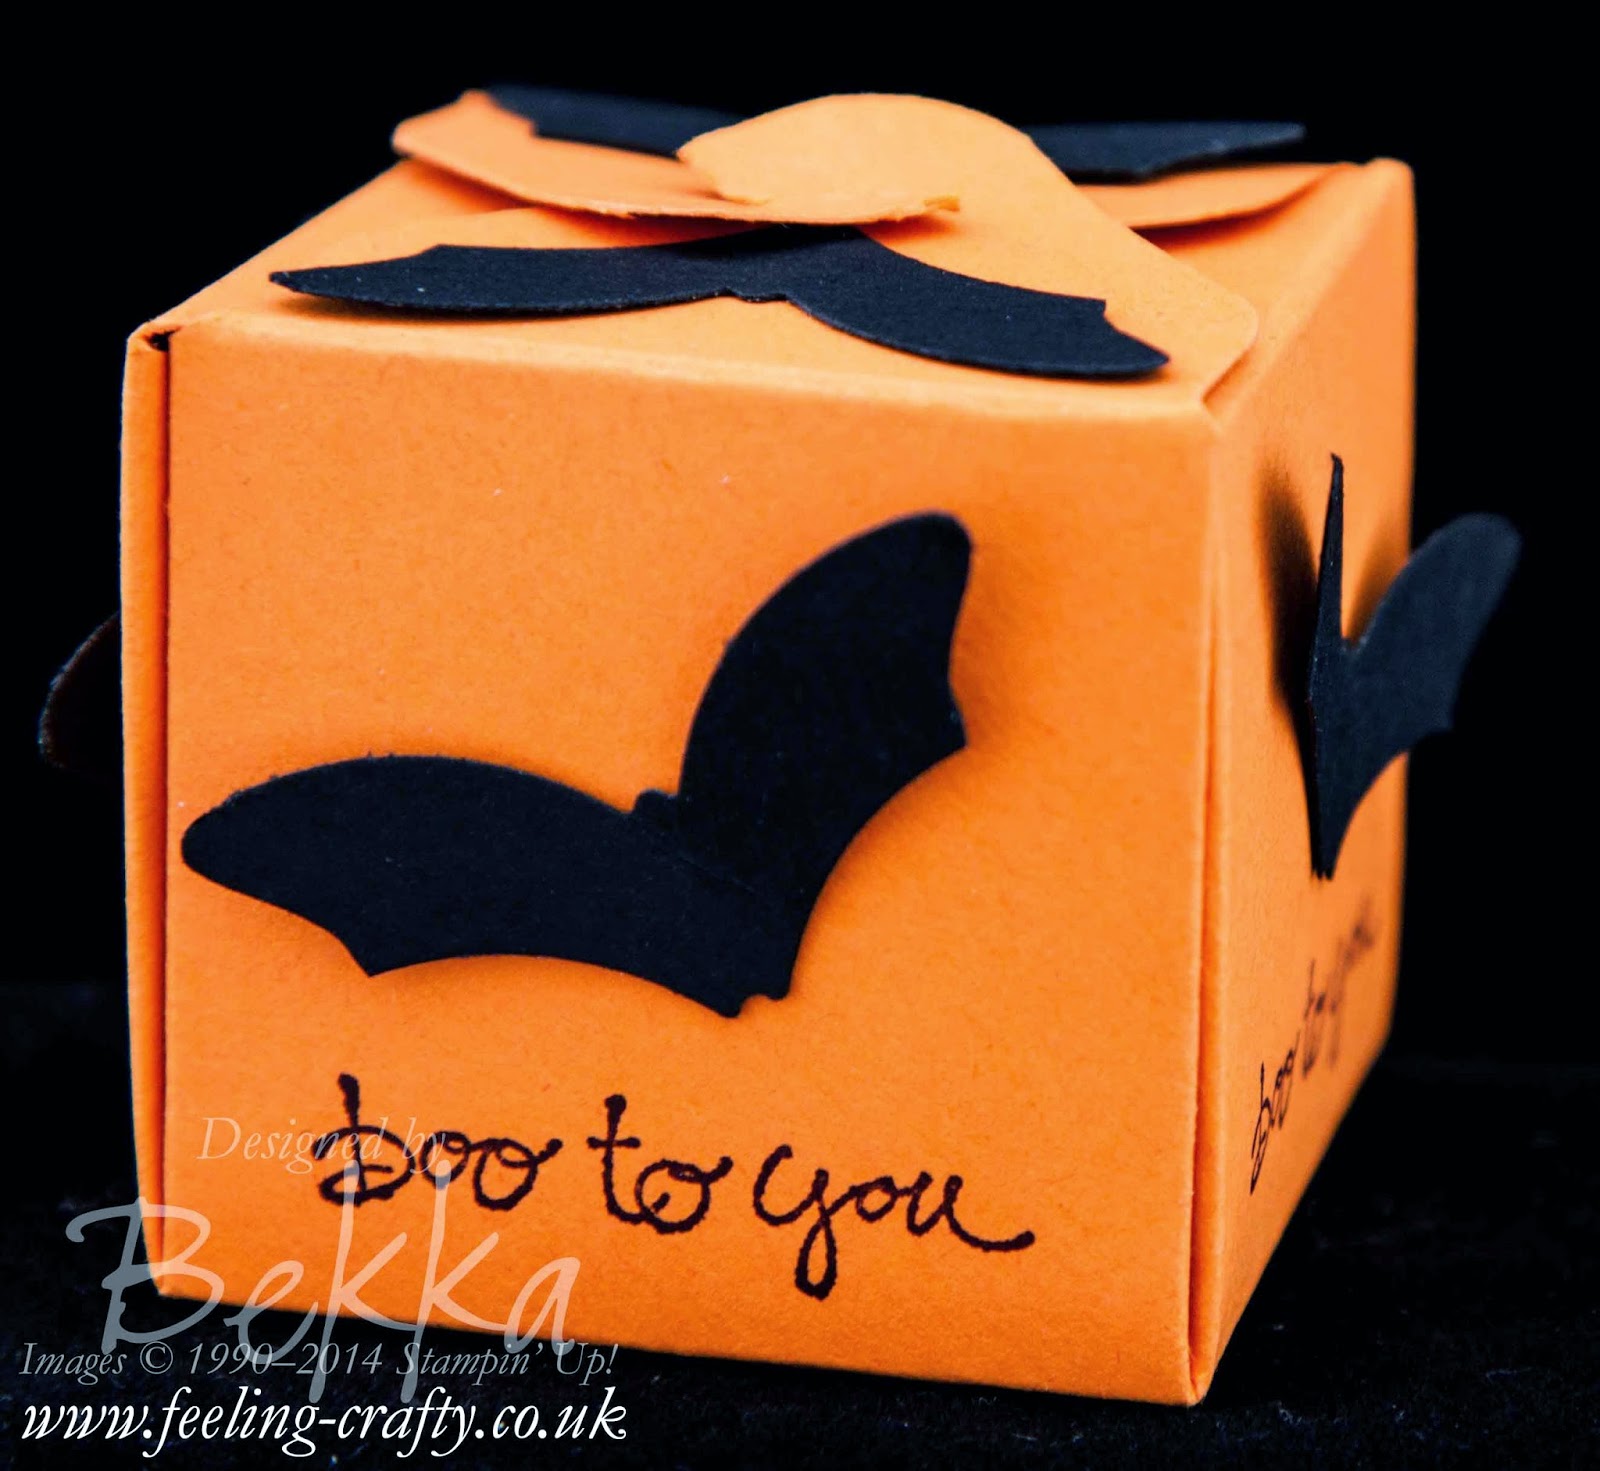 Halloween Treat Box with a Bat made with the Elegant Butterfly Punch - check this post to find out how it was made